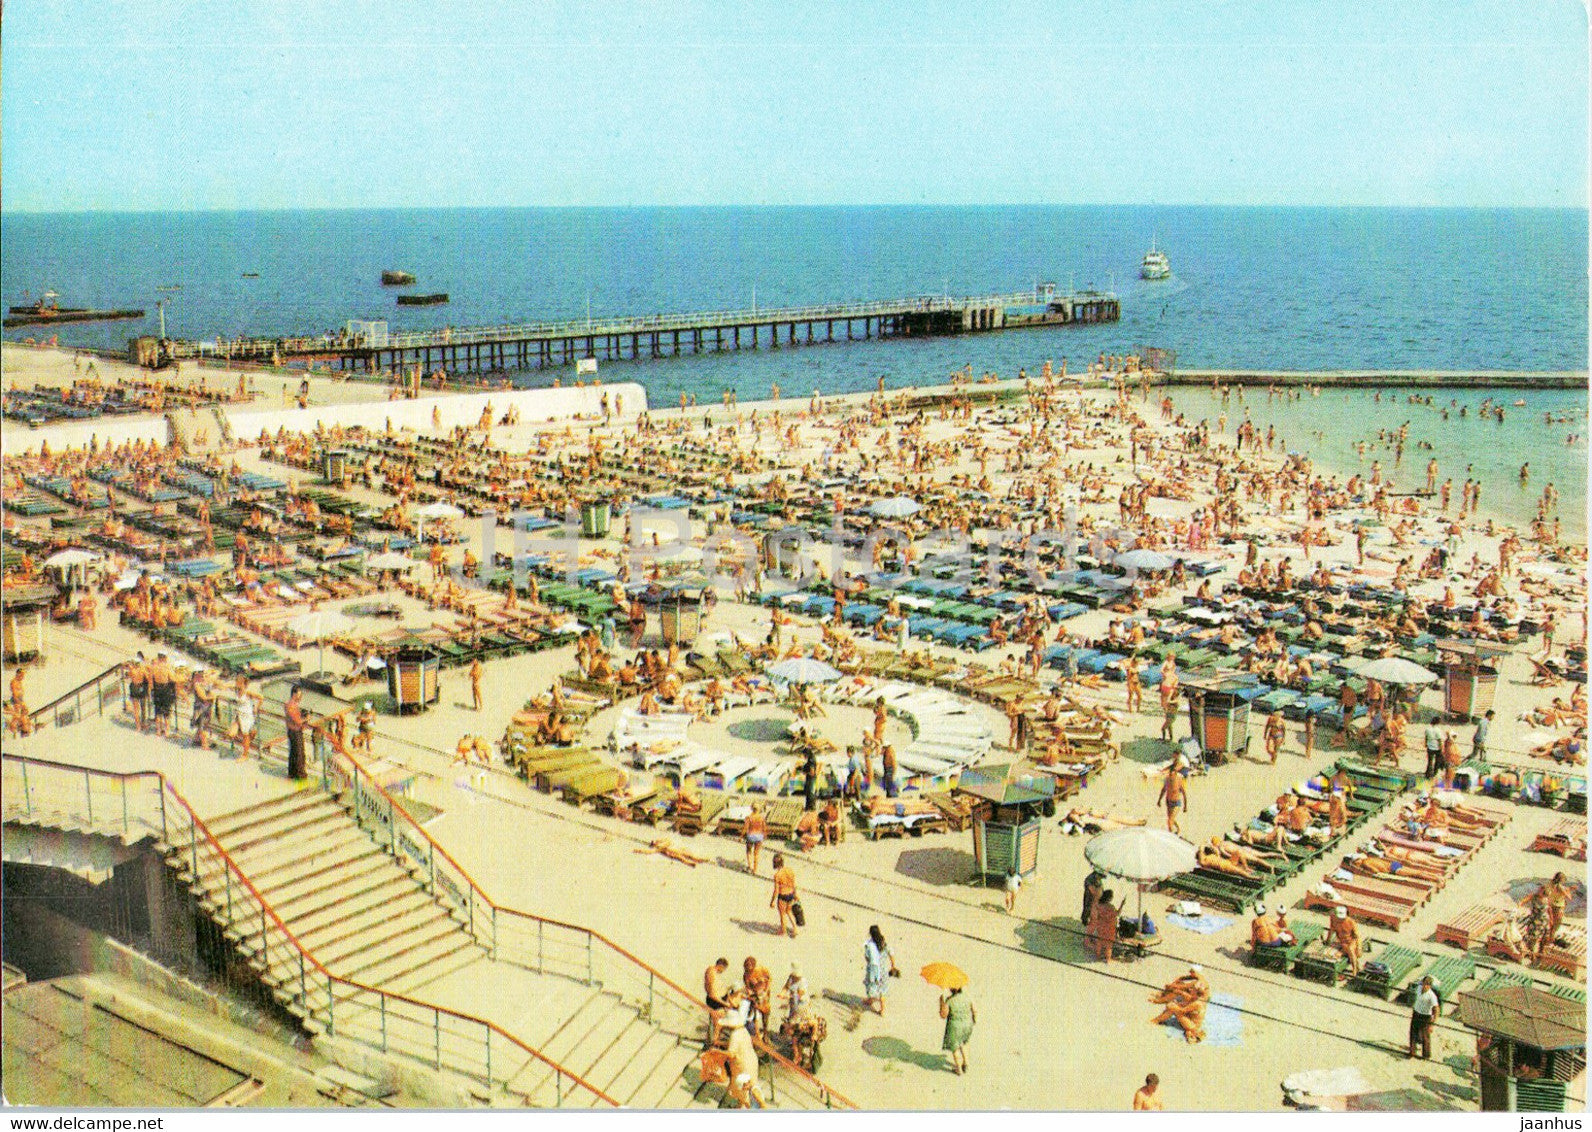 Odessa - Beach of the 10th station of Great Fountain - postal stationery - 1981 - Ukraine USSR - unused - JH Postcards